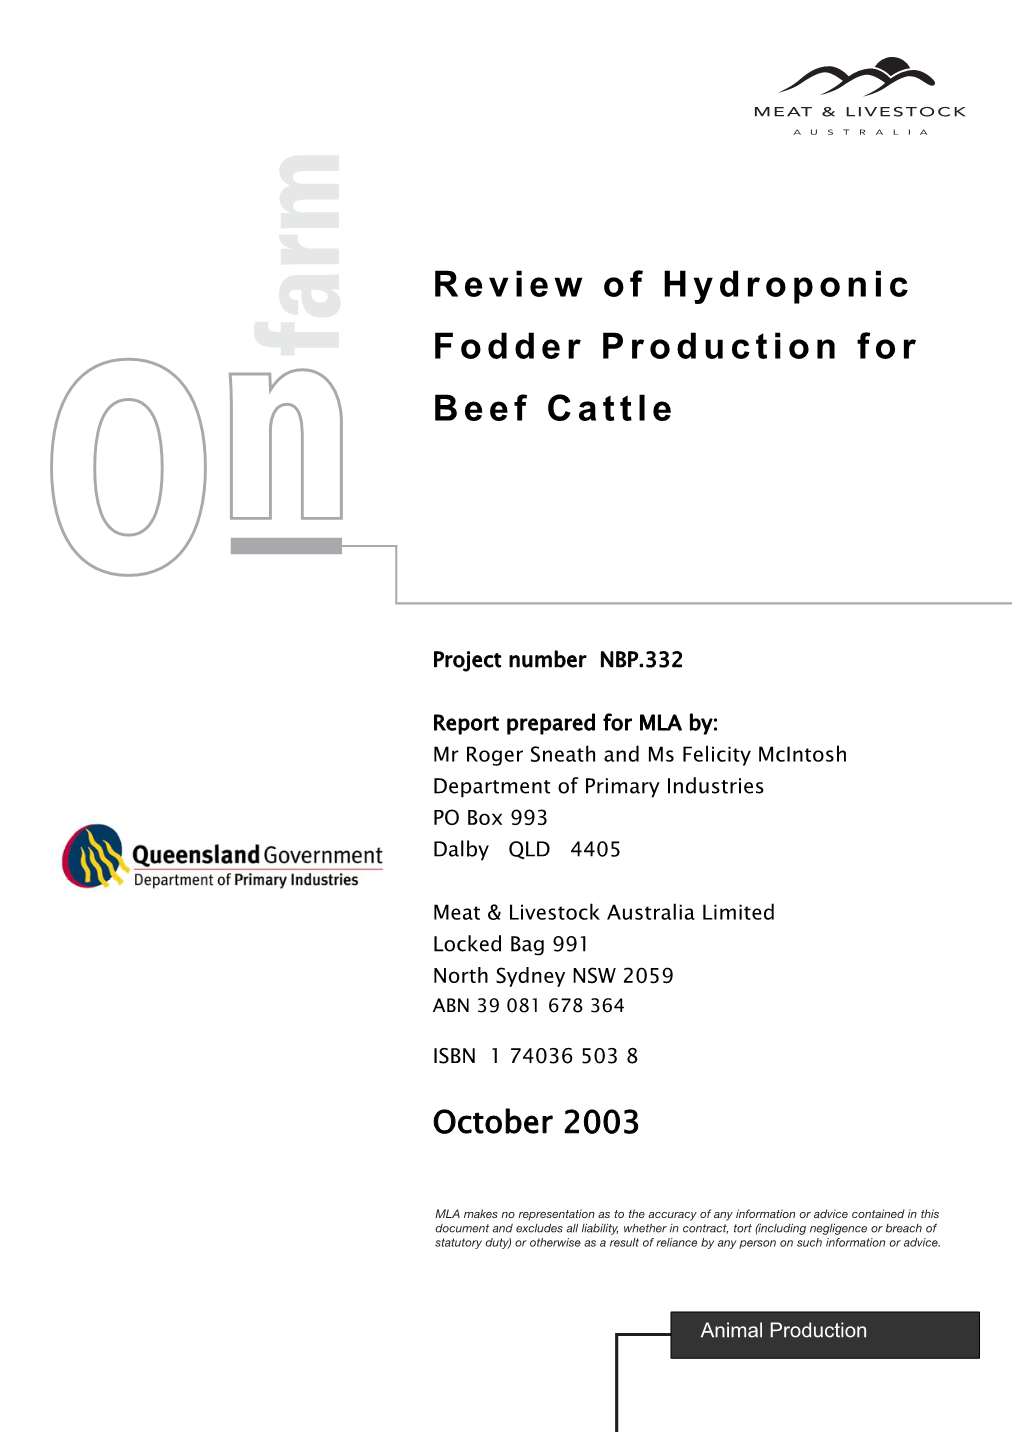 Review of Hydroponic Fodder Production for Beef Cattle